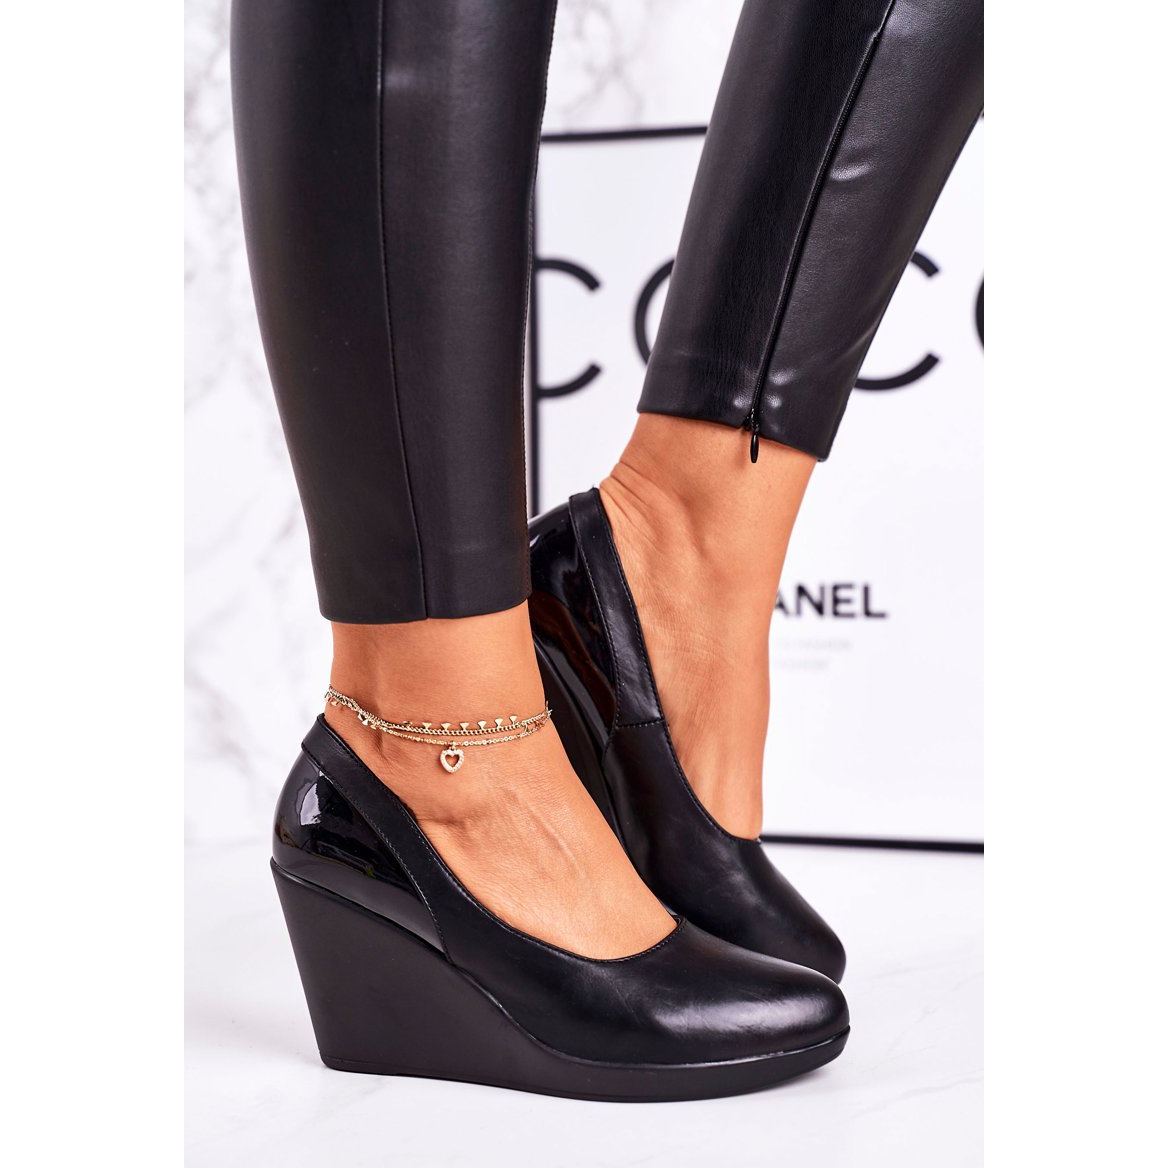 Emigrere champion Absolut LUISA PLATFORM WEDGE HEEL COURT SHOES IN BLACK FAUX LEATHER